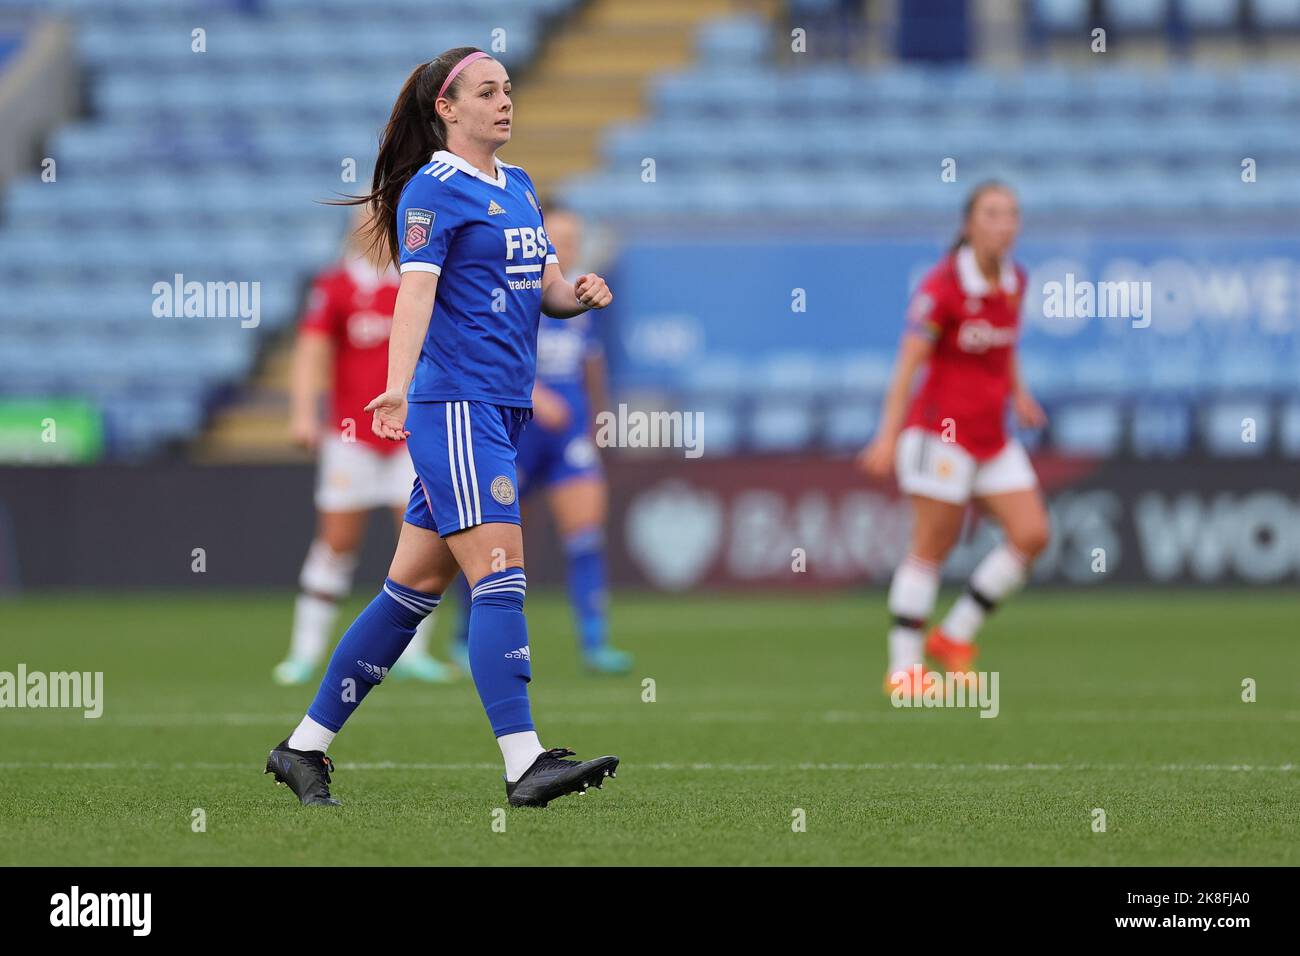 Leicester, UK. 23rd Oct, 2022. Leicester, England, October 23rd 2022: Sam Tierney (13 Leicester City) gestures during the Barclays FA Womens Super League game between Leicester City and Manchester United at the King Power Stadium in Leicester, England. (James Holyoak/SPP) Credit: SPP Sport Press Photo. /Alamy Live News Stock Photo